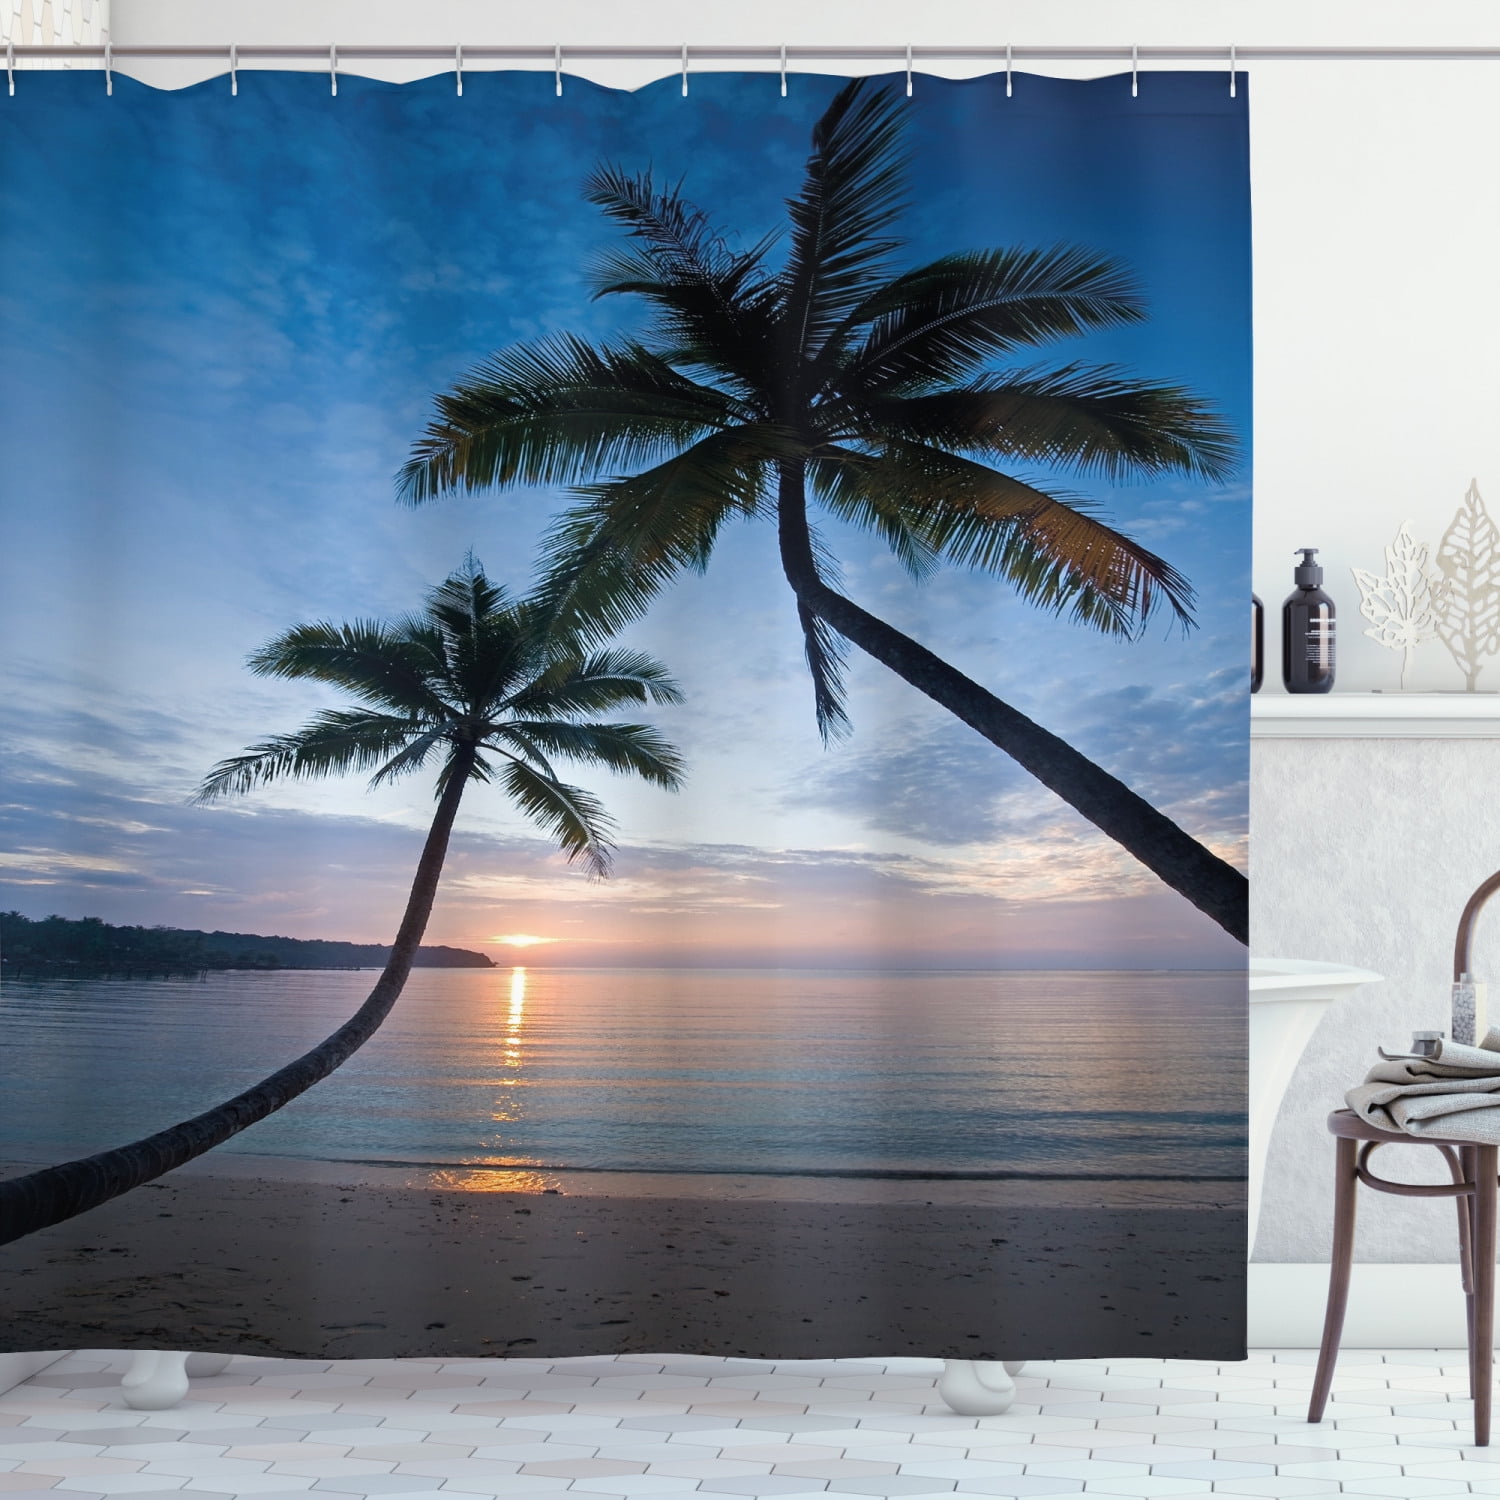 Tropical Beach Theme Sunrise Morning Exotic Nature Picture Shower Curtain Set 